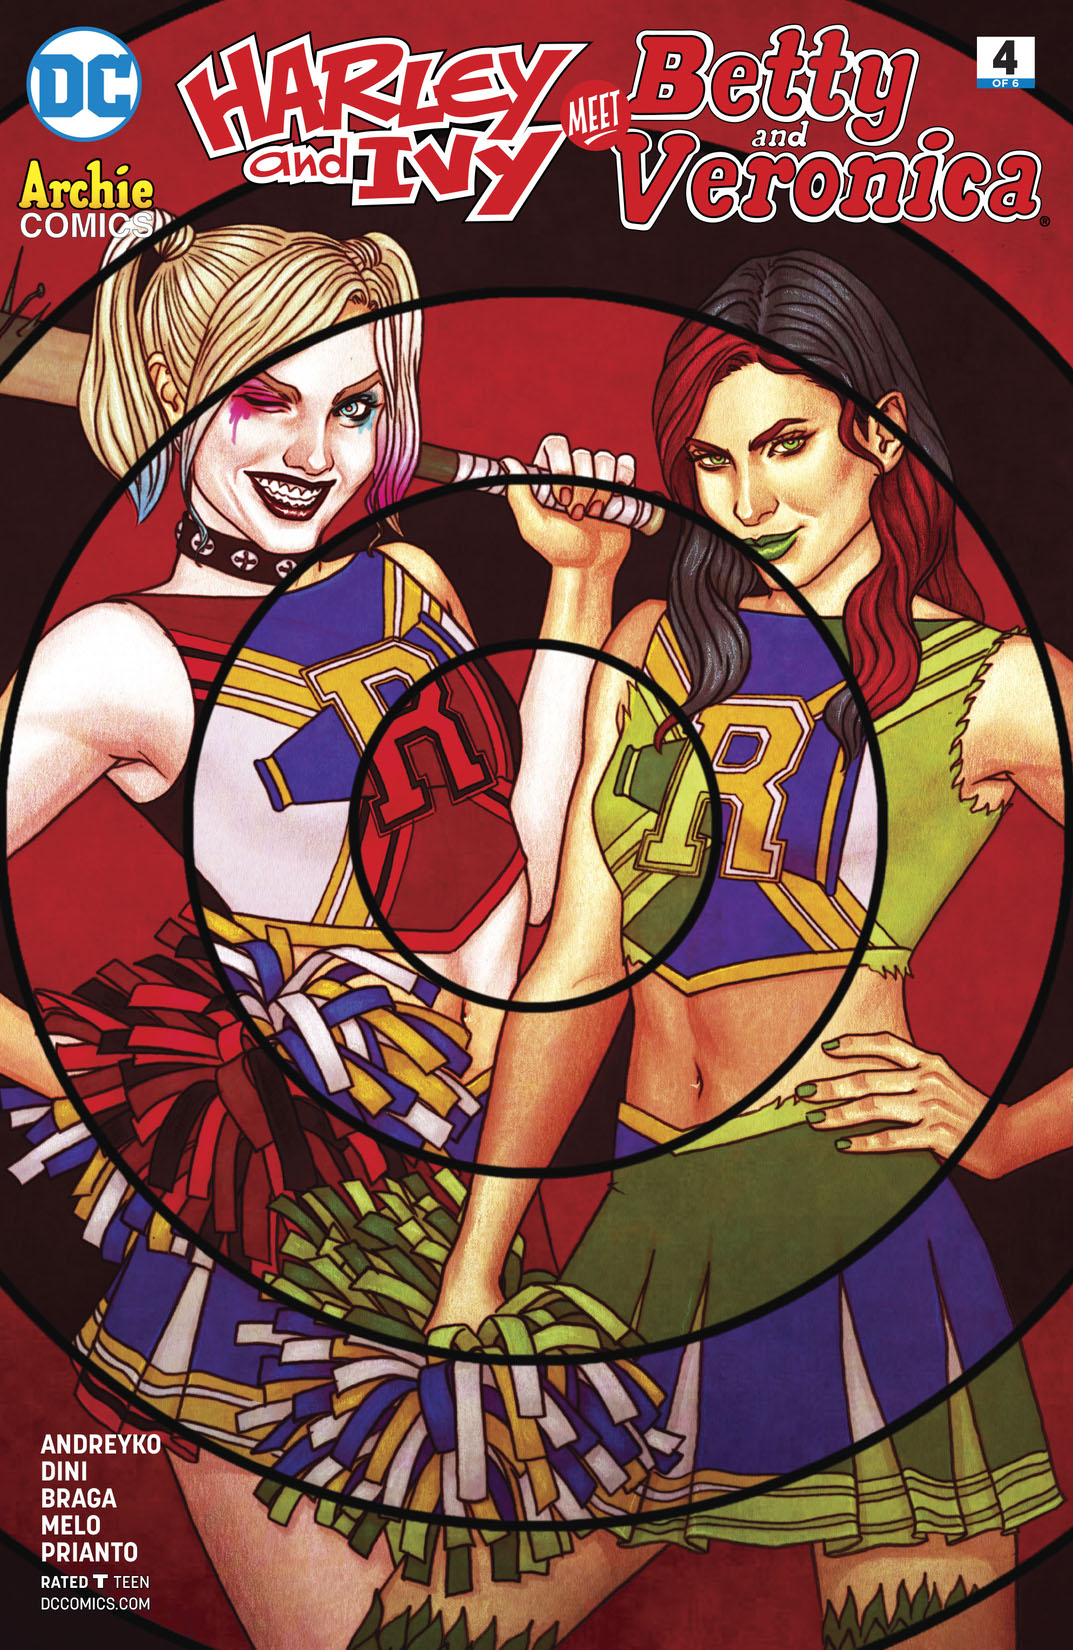 Harley & Ivy Meet Betty and Veronica #4 preview images